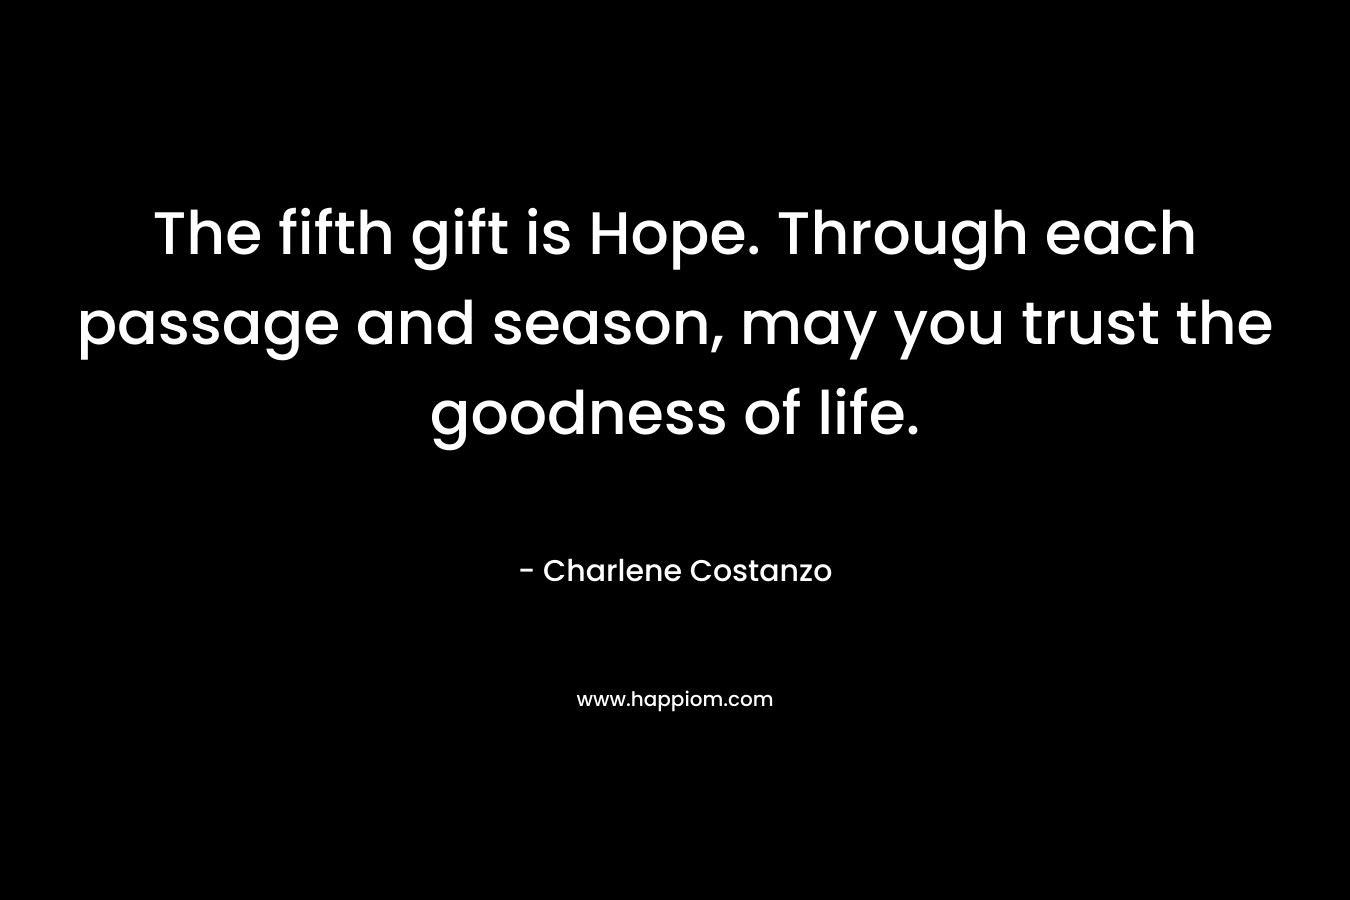 The fifth gift is Hope. Through each passage and season, may you trust the goodness of life. – Charlene Costanzo